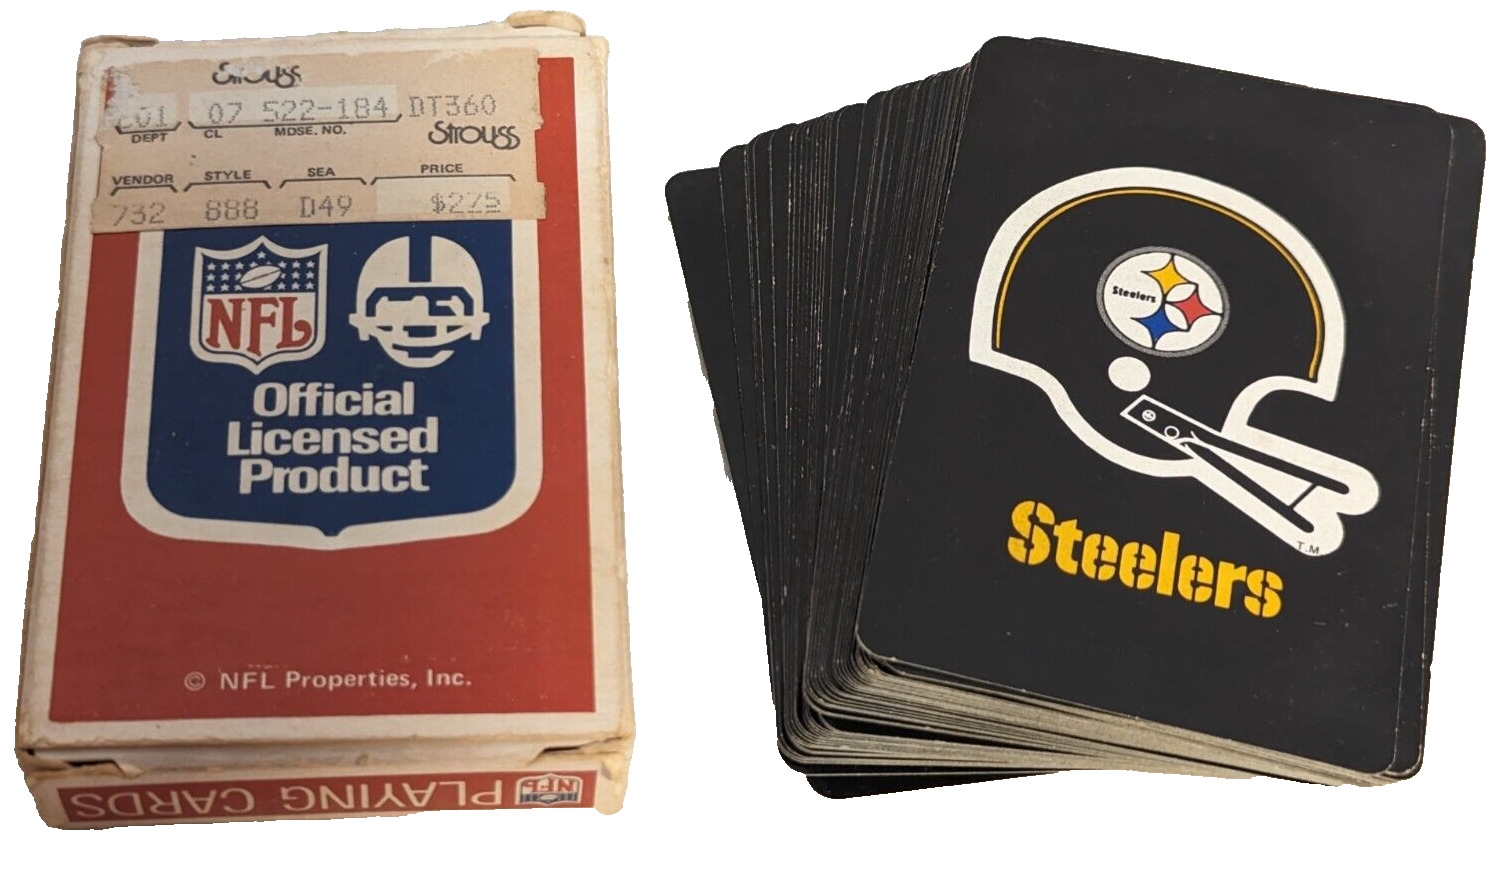 1968 Pittsburgh Steelers Deck of NFL Playing Cards w Original Box VTG Official +